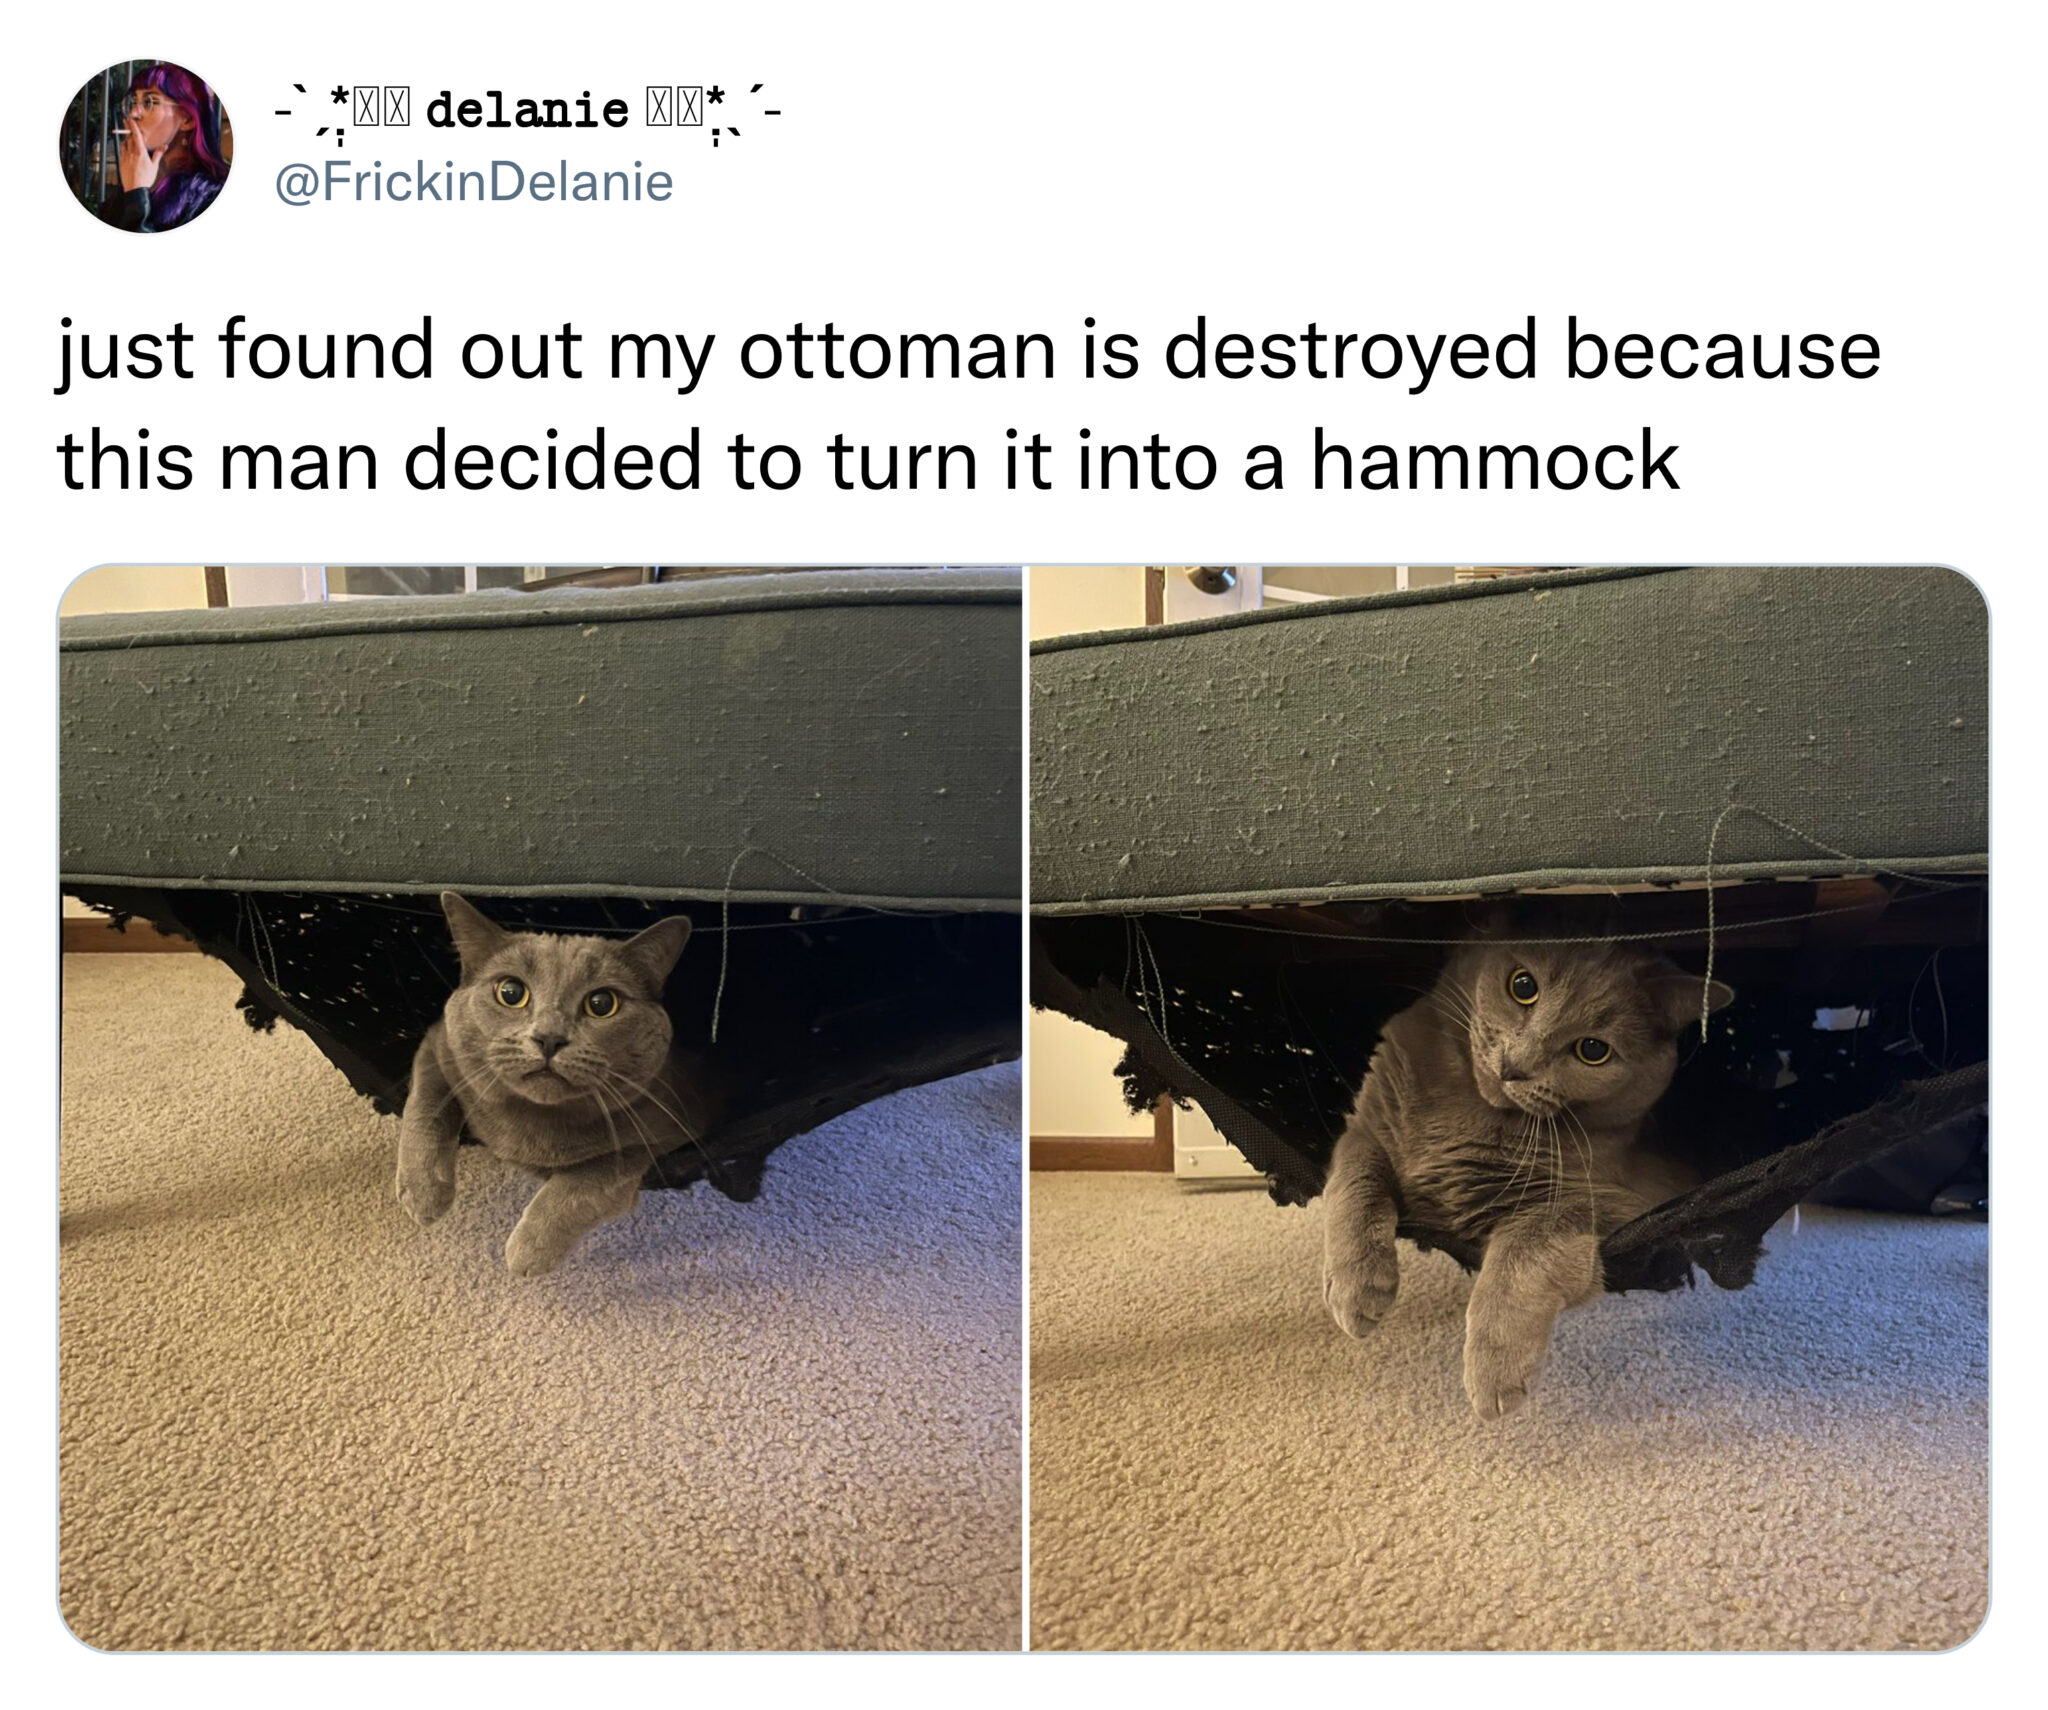 funny tweets  -  vehicle - Xx delanie Xx just found out my ottoman is destroyed because this man decided to turn it into a hammock